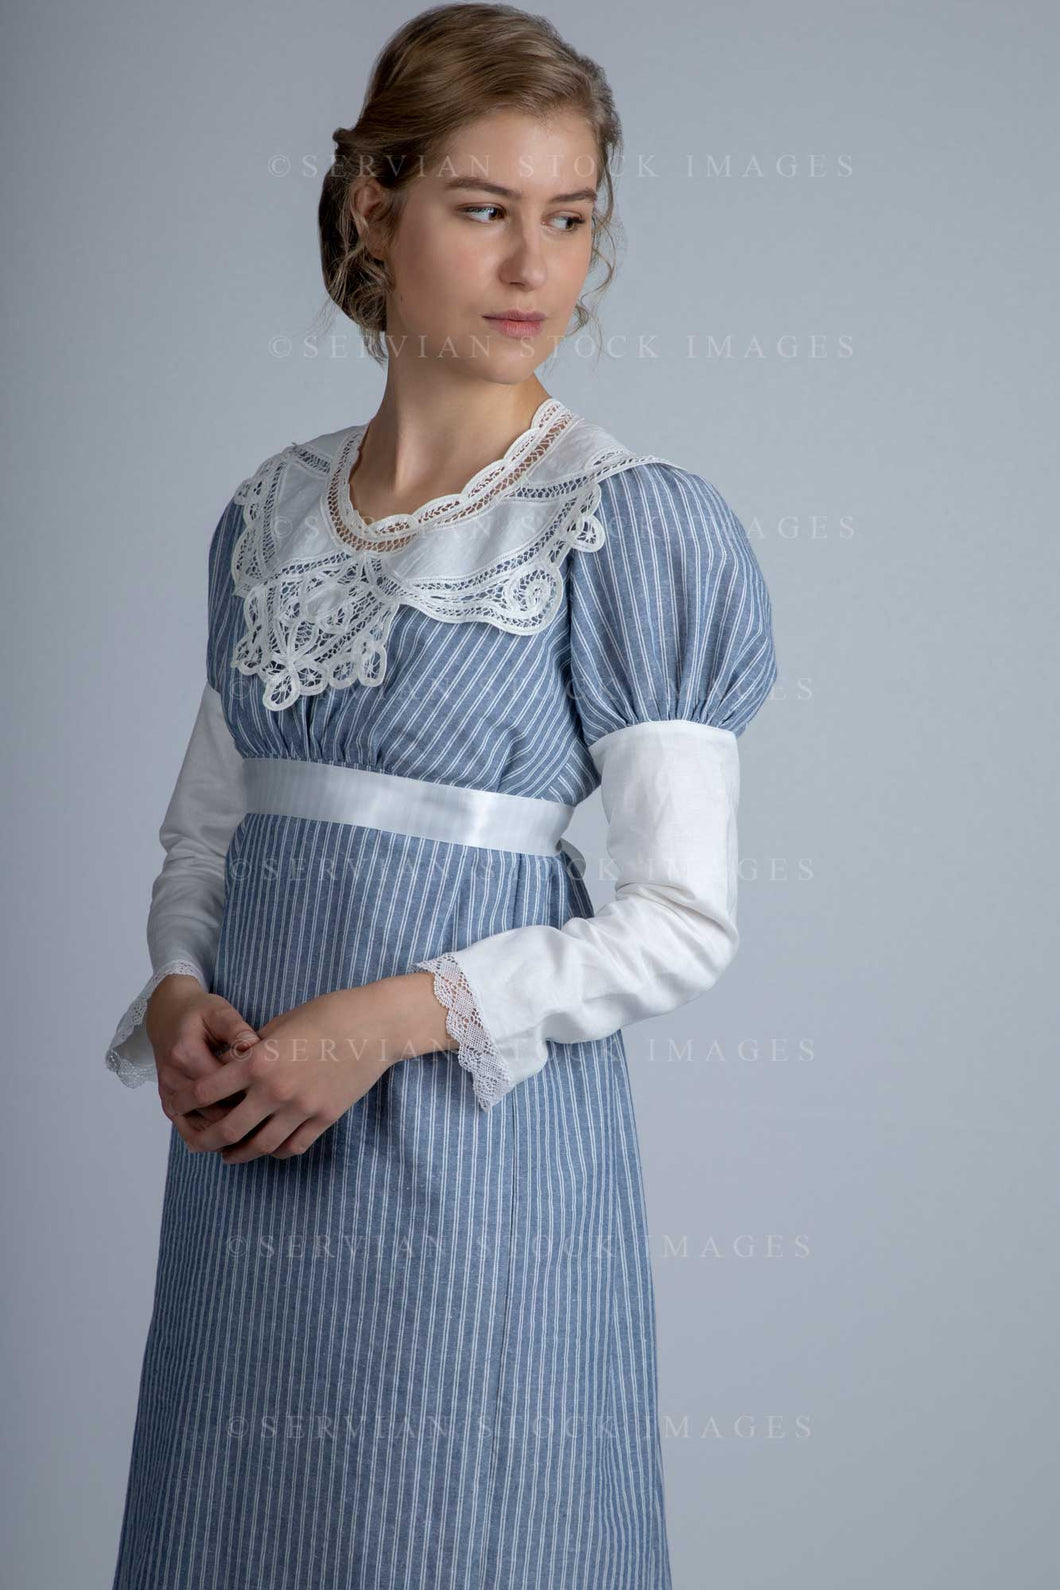 Regency woman in a striped cotton dress with a lace collar (Amalia 0616)